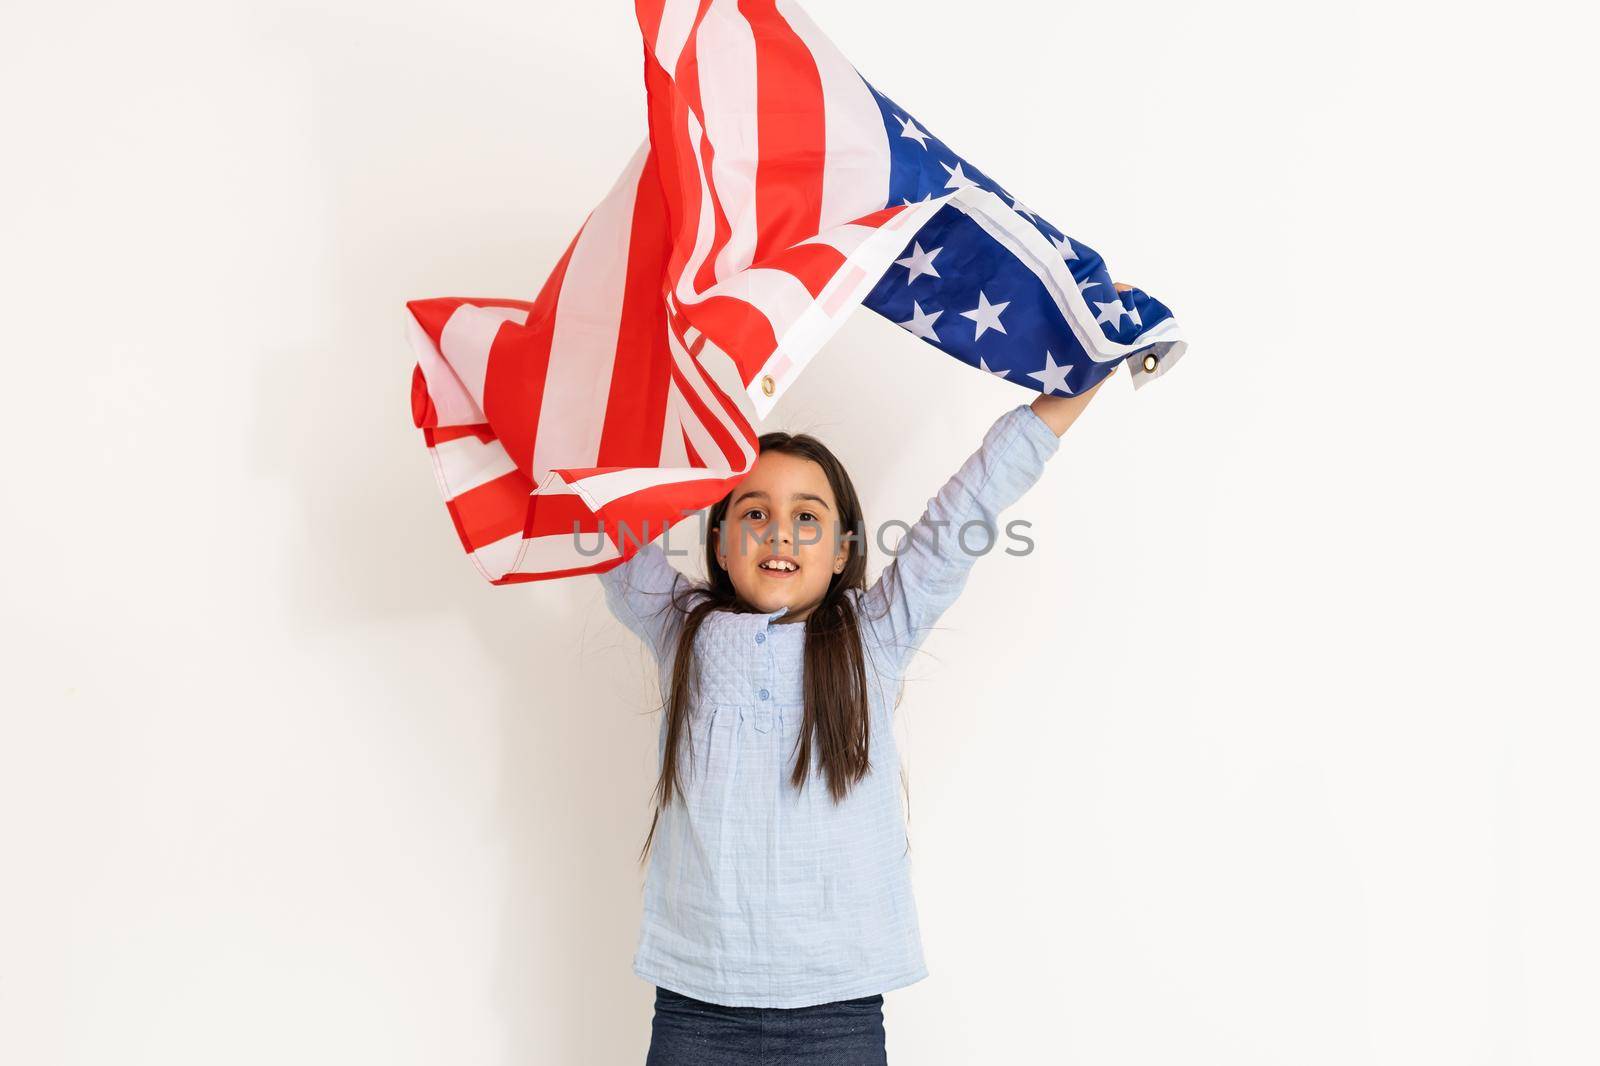 Patriotic holiday. Happy kid, cute little child girl with American flag. USA celebrate 4th of July